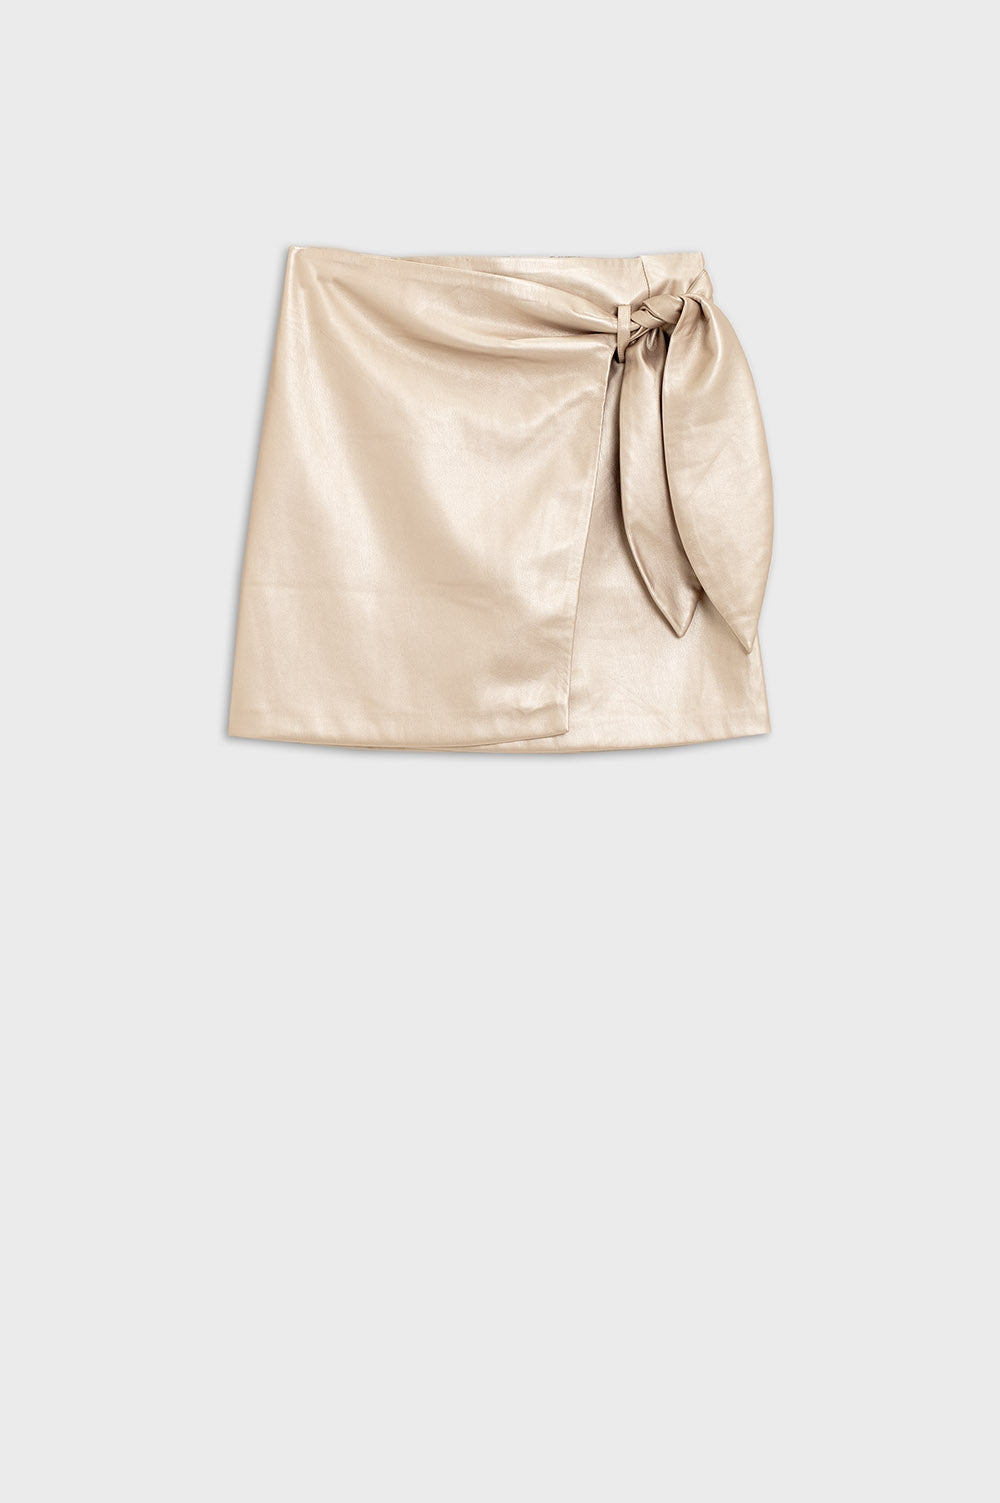 Q2 Gold faux leather mini skirt with bow on the side